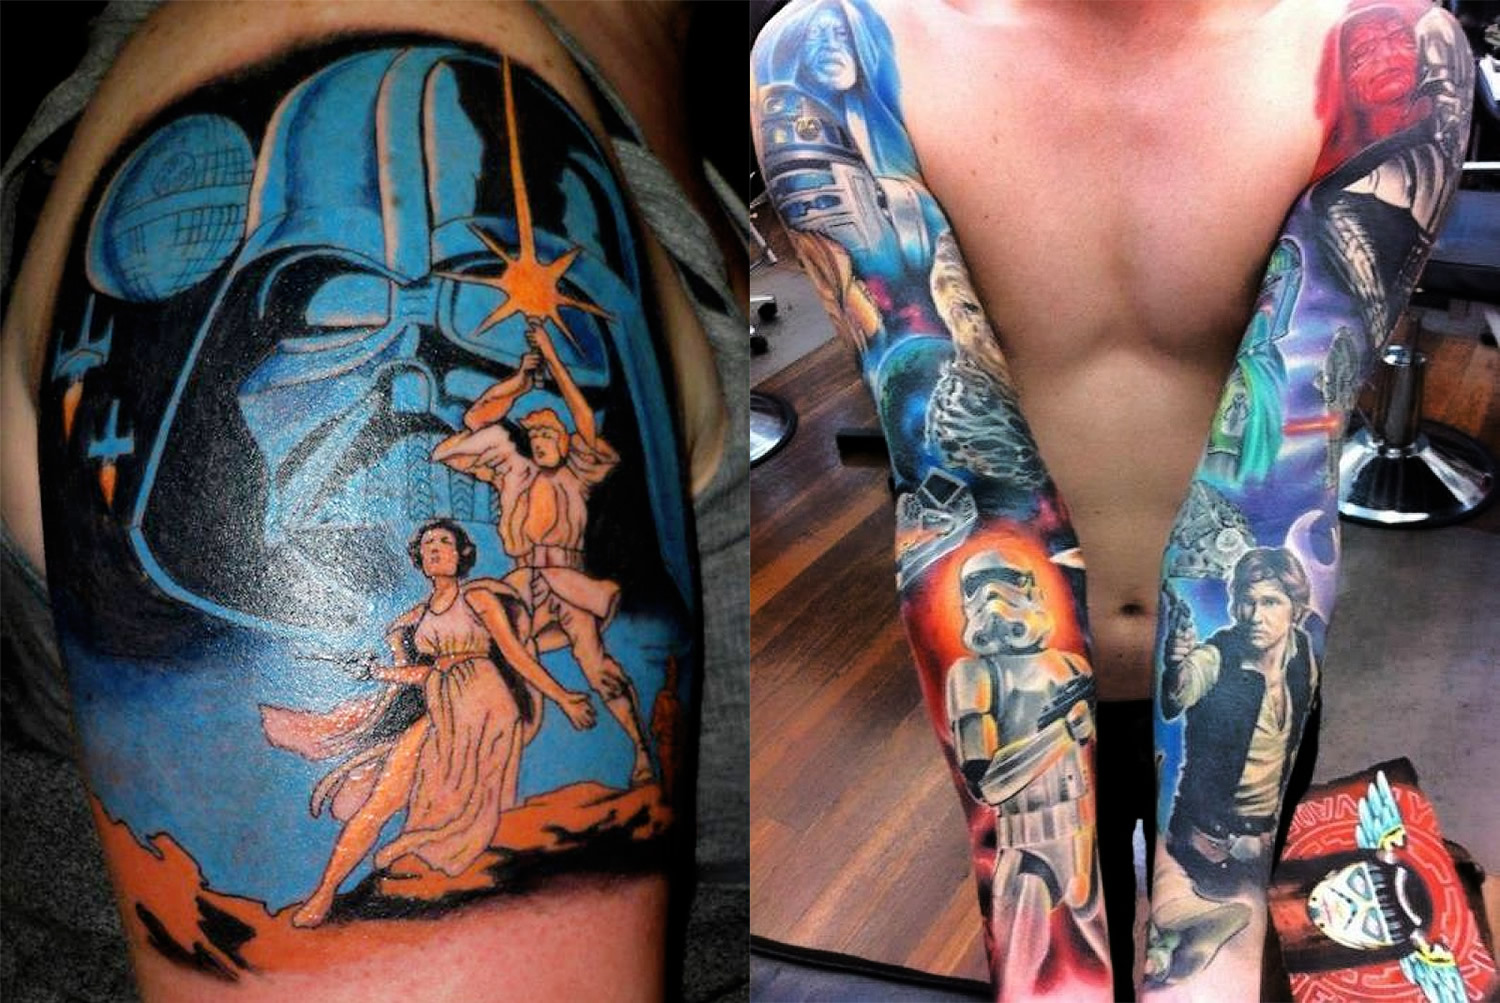 lightsaber in Tattoos  Search in 13M Tattoos Now  Tattoodo